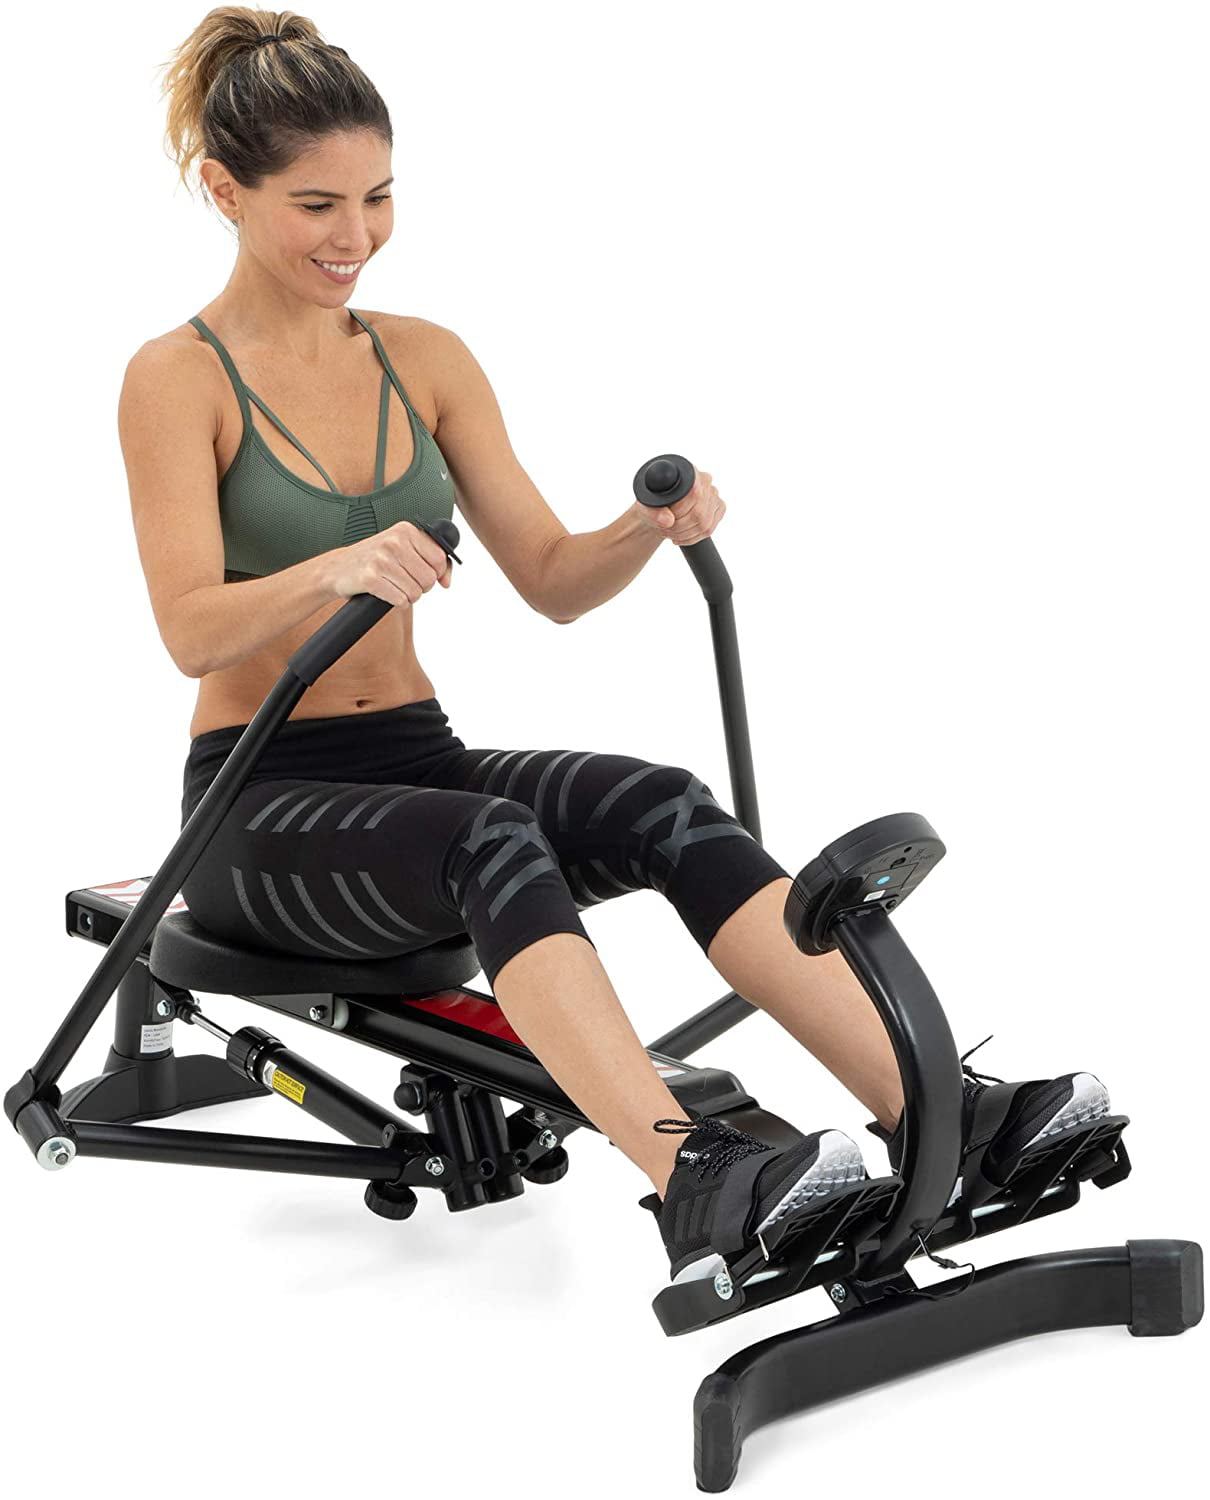 Circuit Fitness Deluxe Foldable Magnetic Rowing Machine with 8 Resistance Settings & Transport Wheels AMZ-986RW Renewed